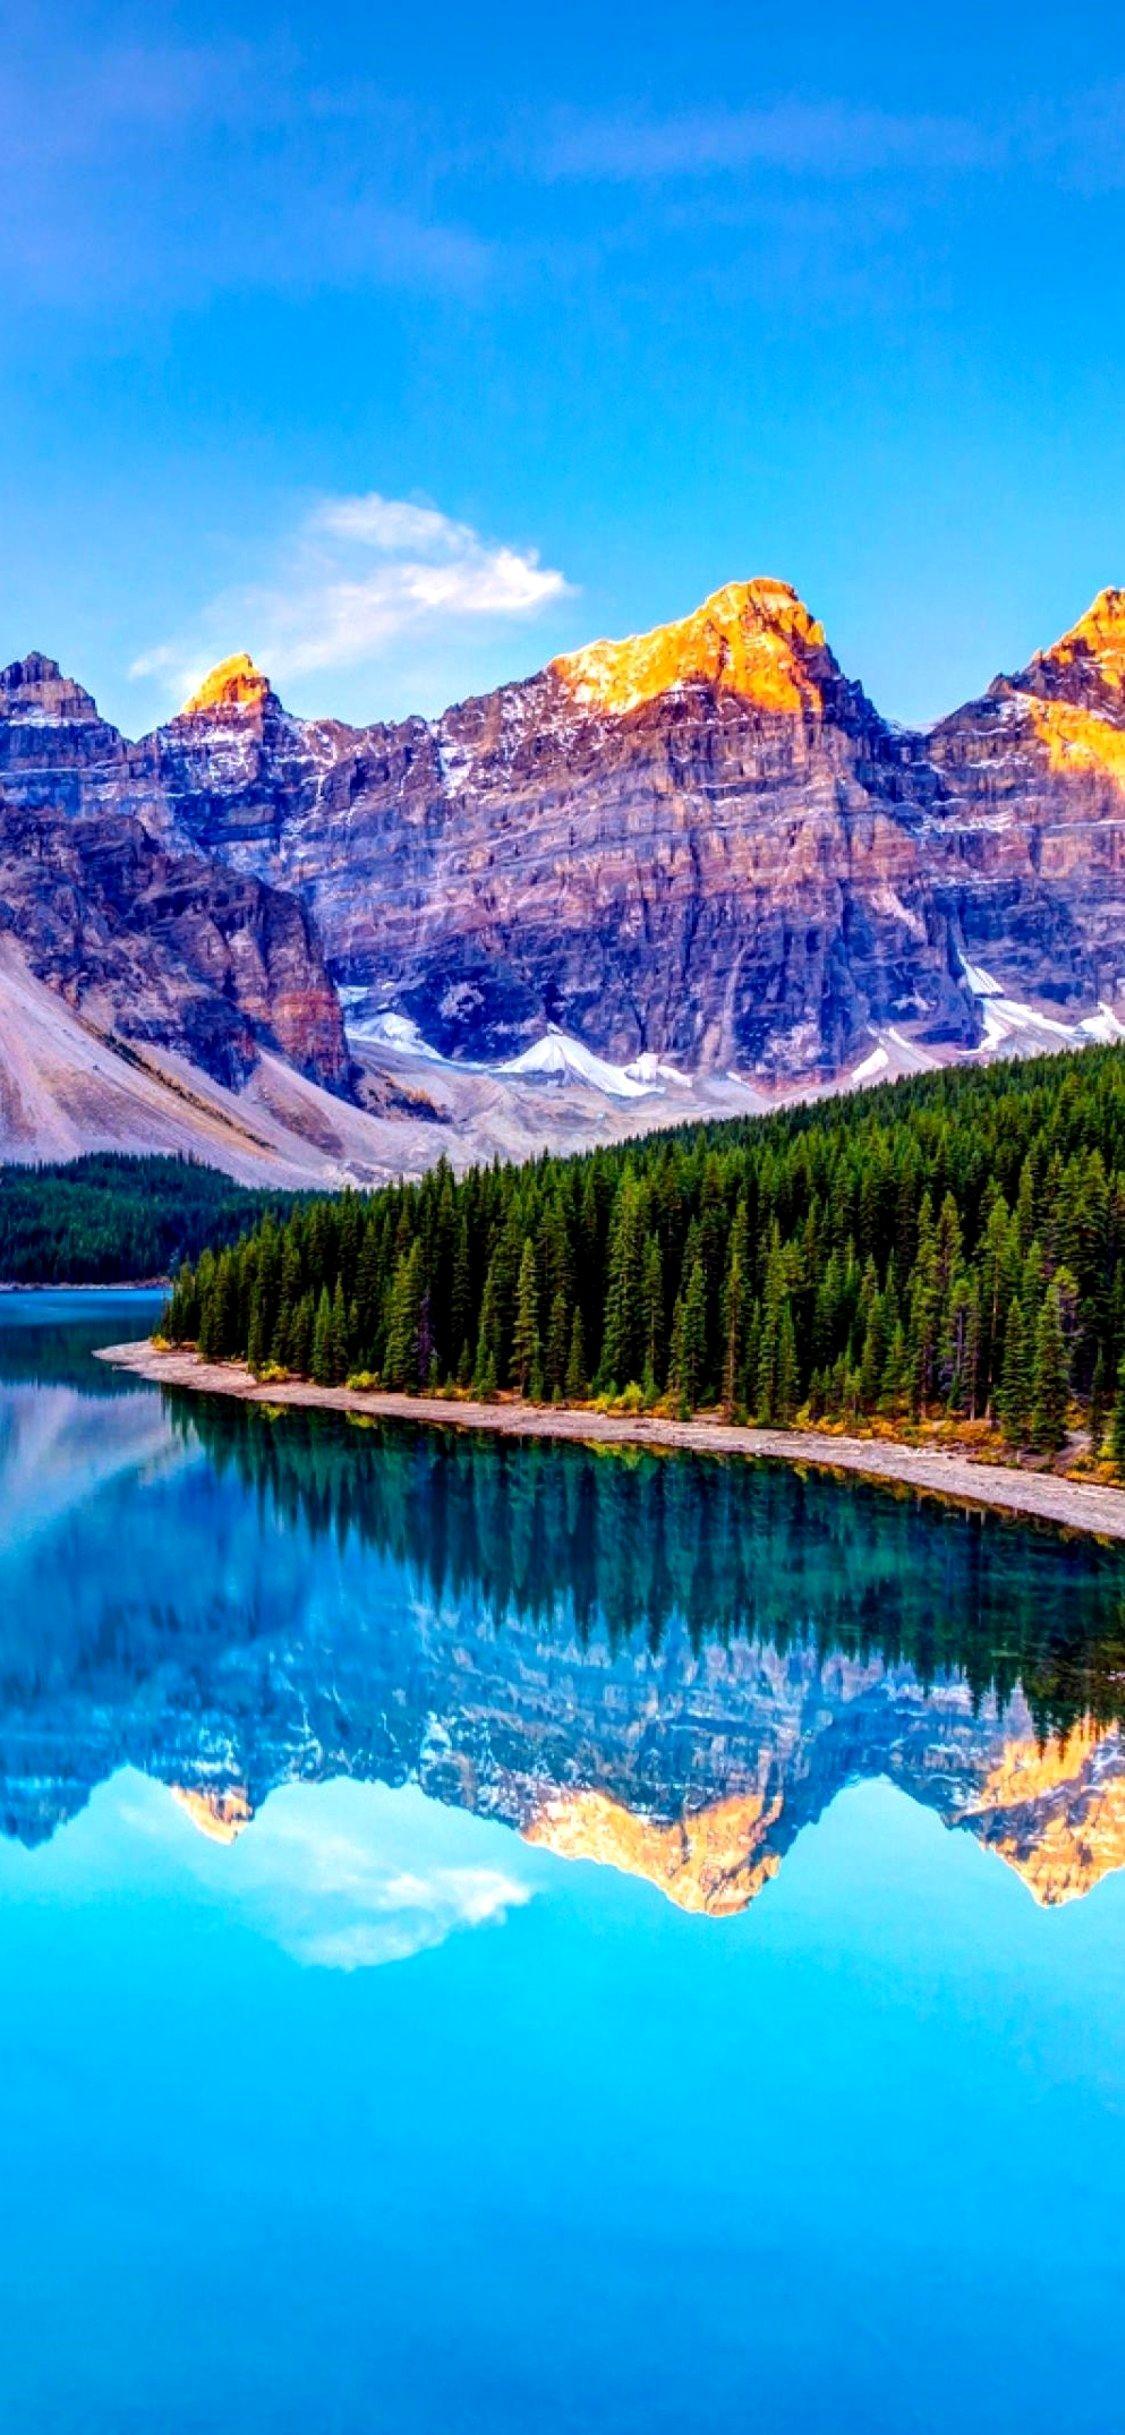 Wallpaper 4K Nature Iphone Ideas Best nature wallpapers Nature